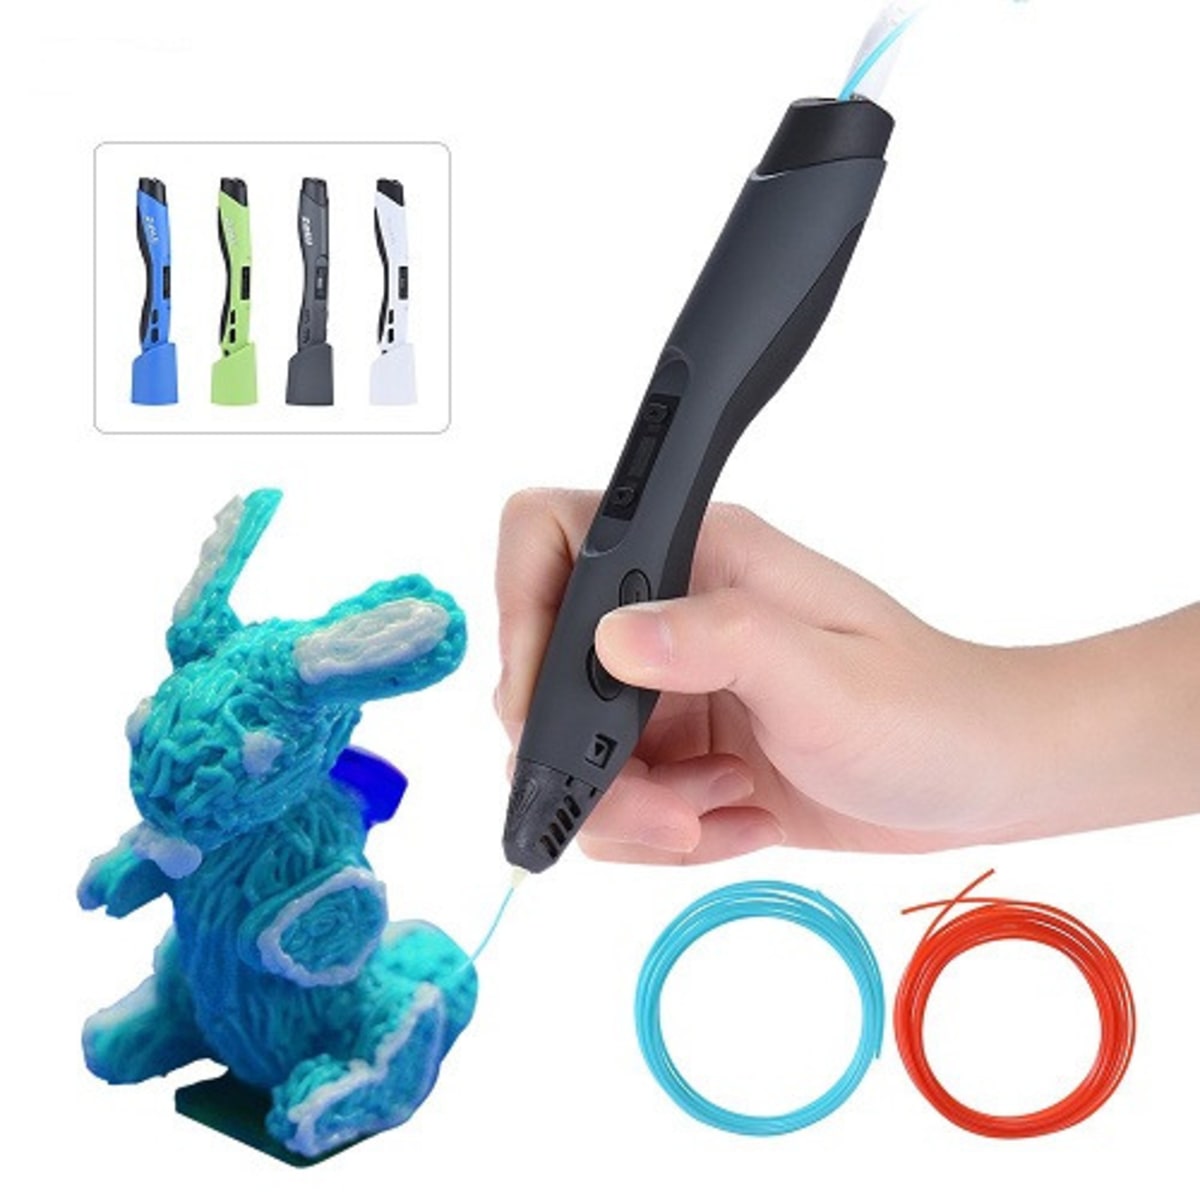 Sunville Professional & Intelligent 3D Printing Pen With LED